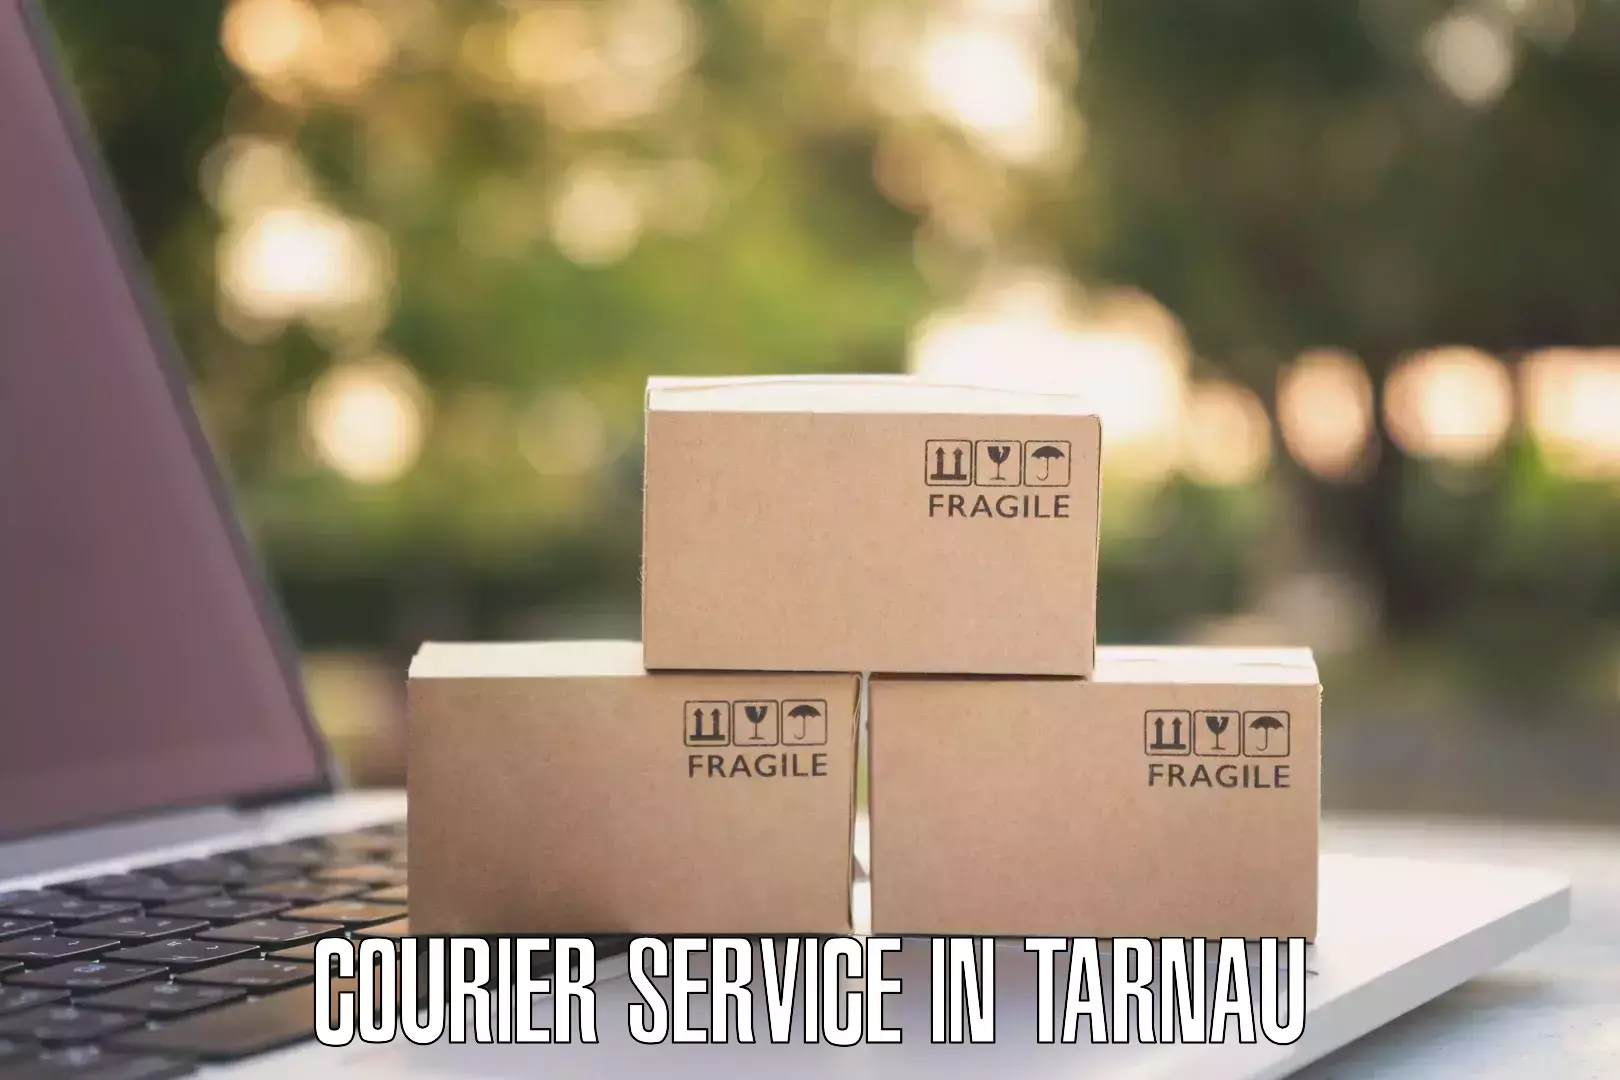 Secure freight services in Tarnau